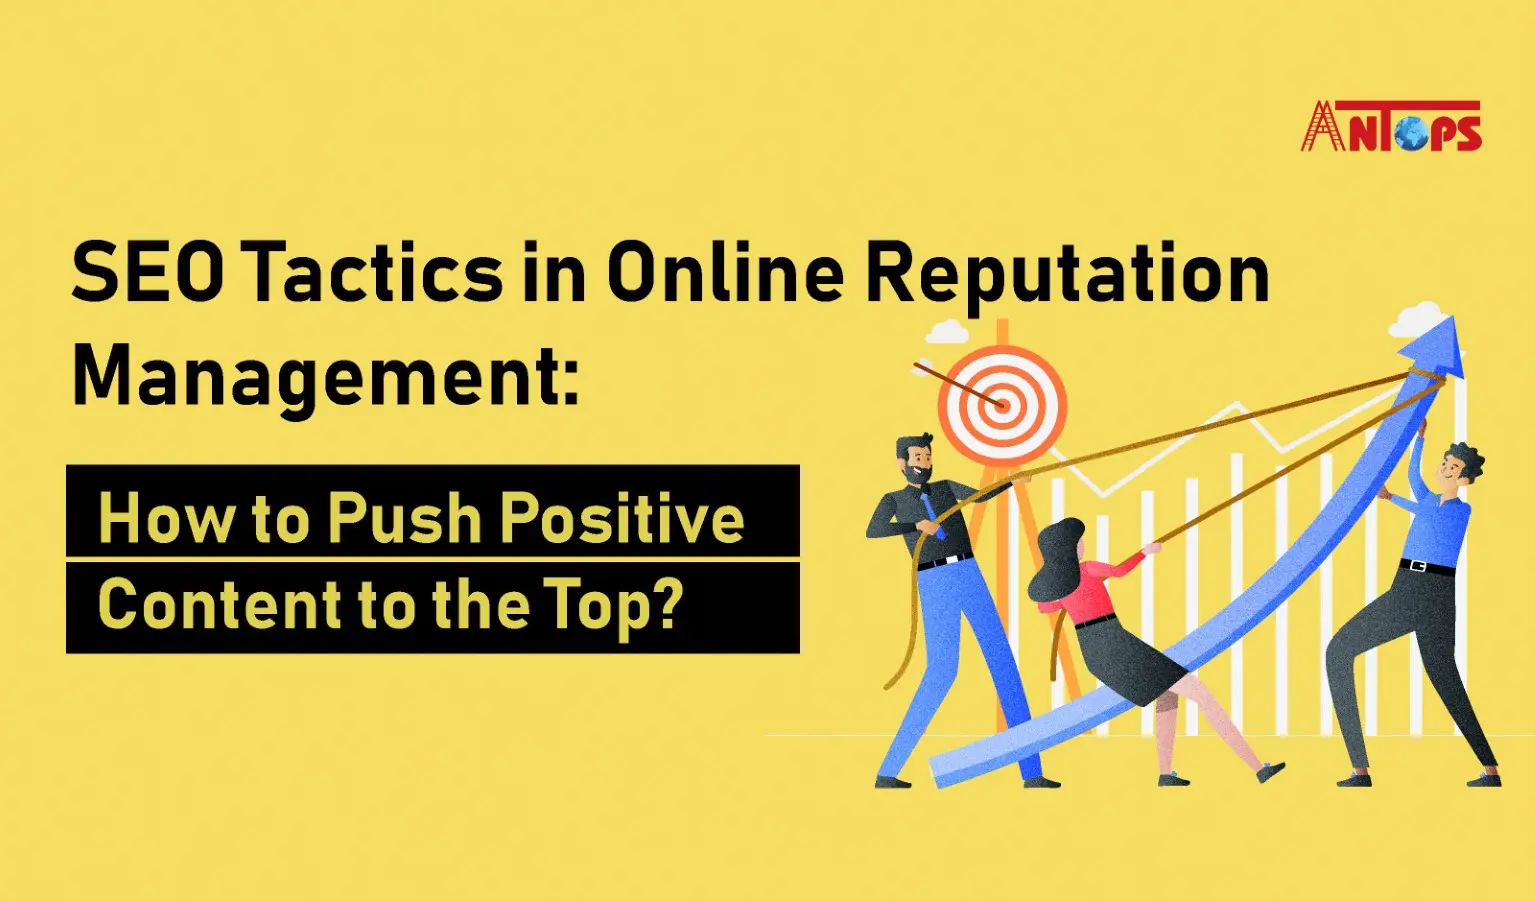 SEO Tactics in Online Reputation Management: How to Push Positive Content to the Top